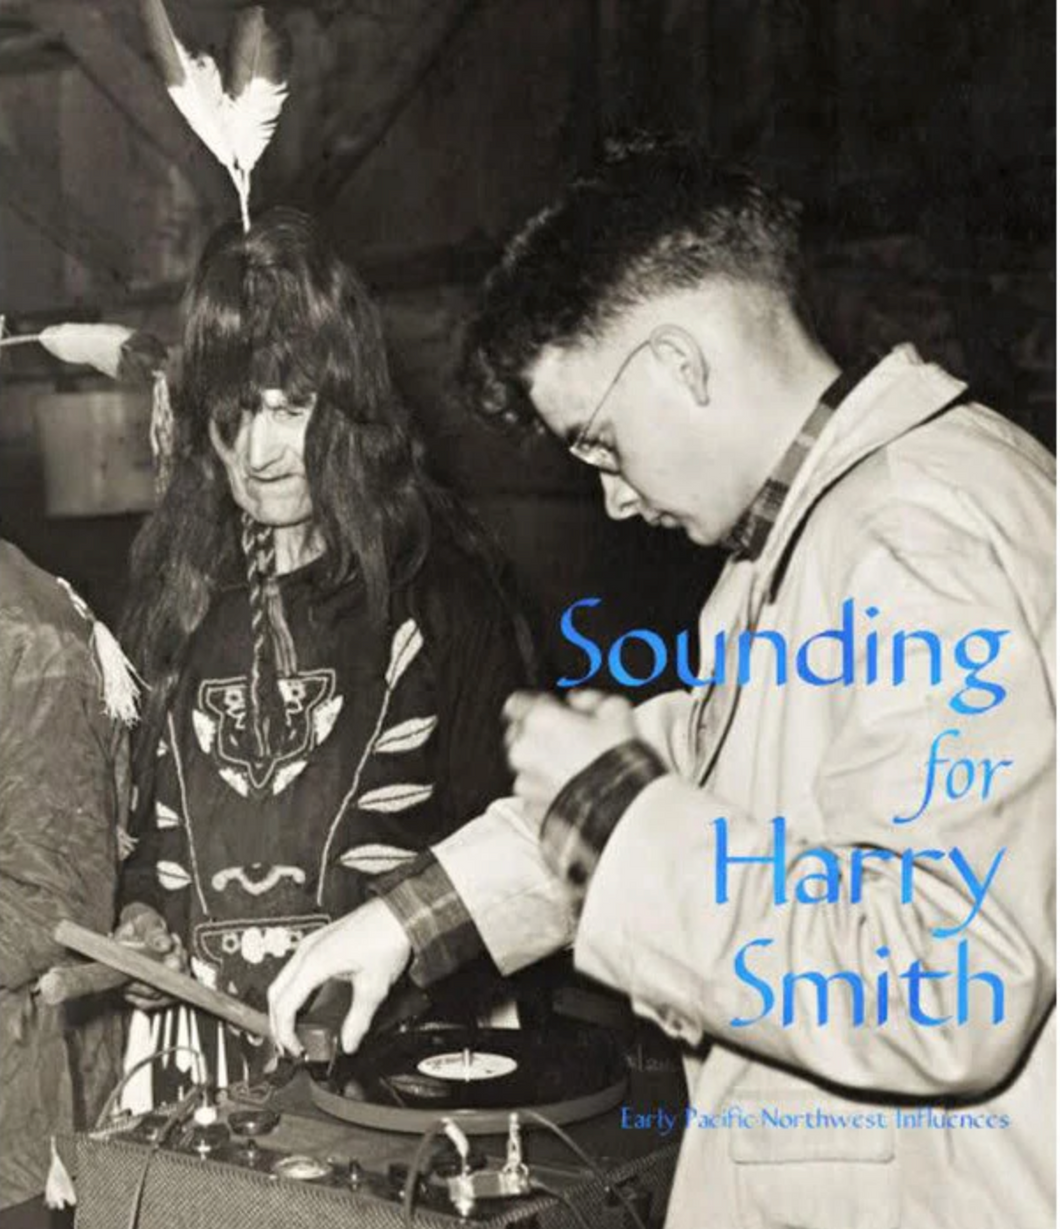 Bret Lunsford- Sounding For Harry Smith: Early Pacific Northwest Influences